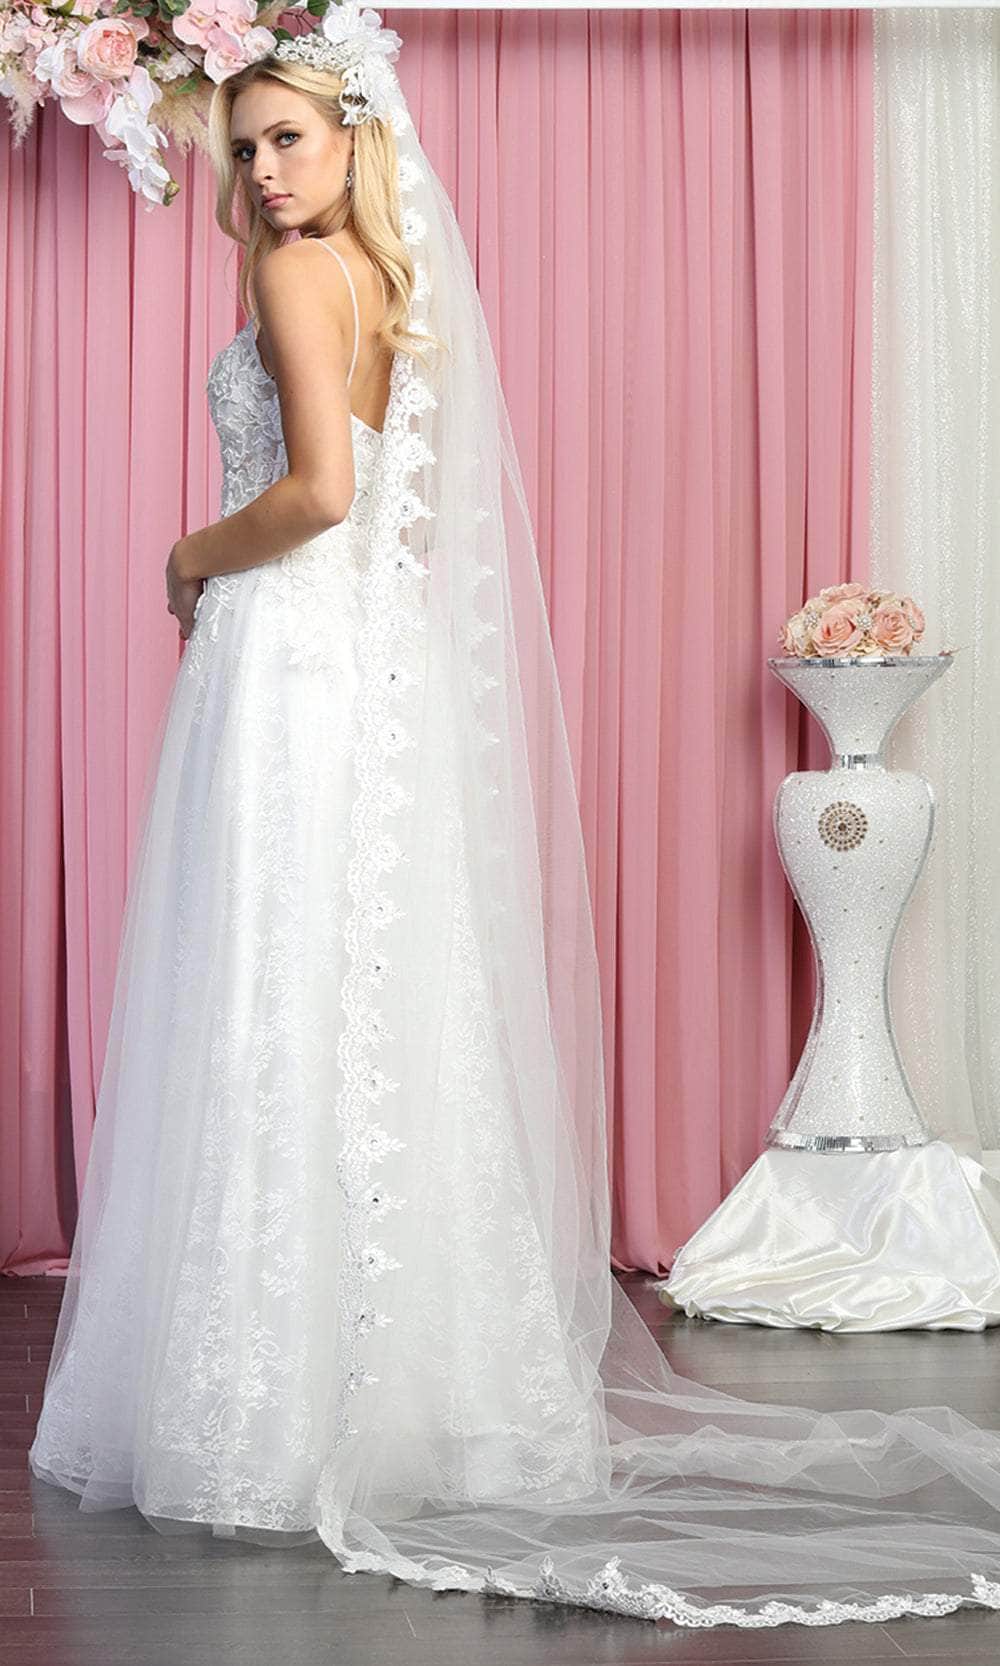 May Queen RQ7915 - Sleeveless Deep V-neck Bridal Gown Special Occasion Dress